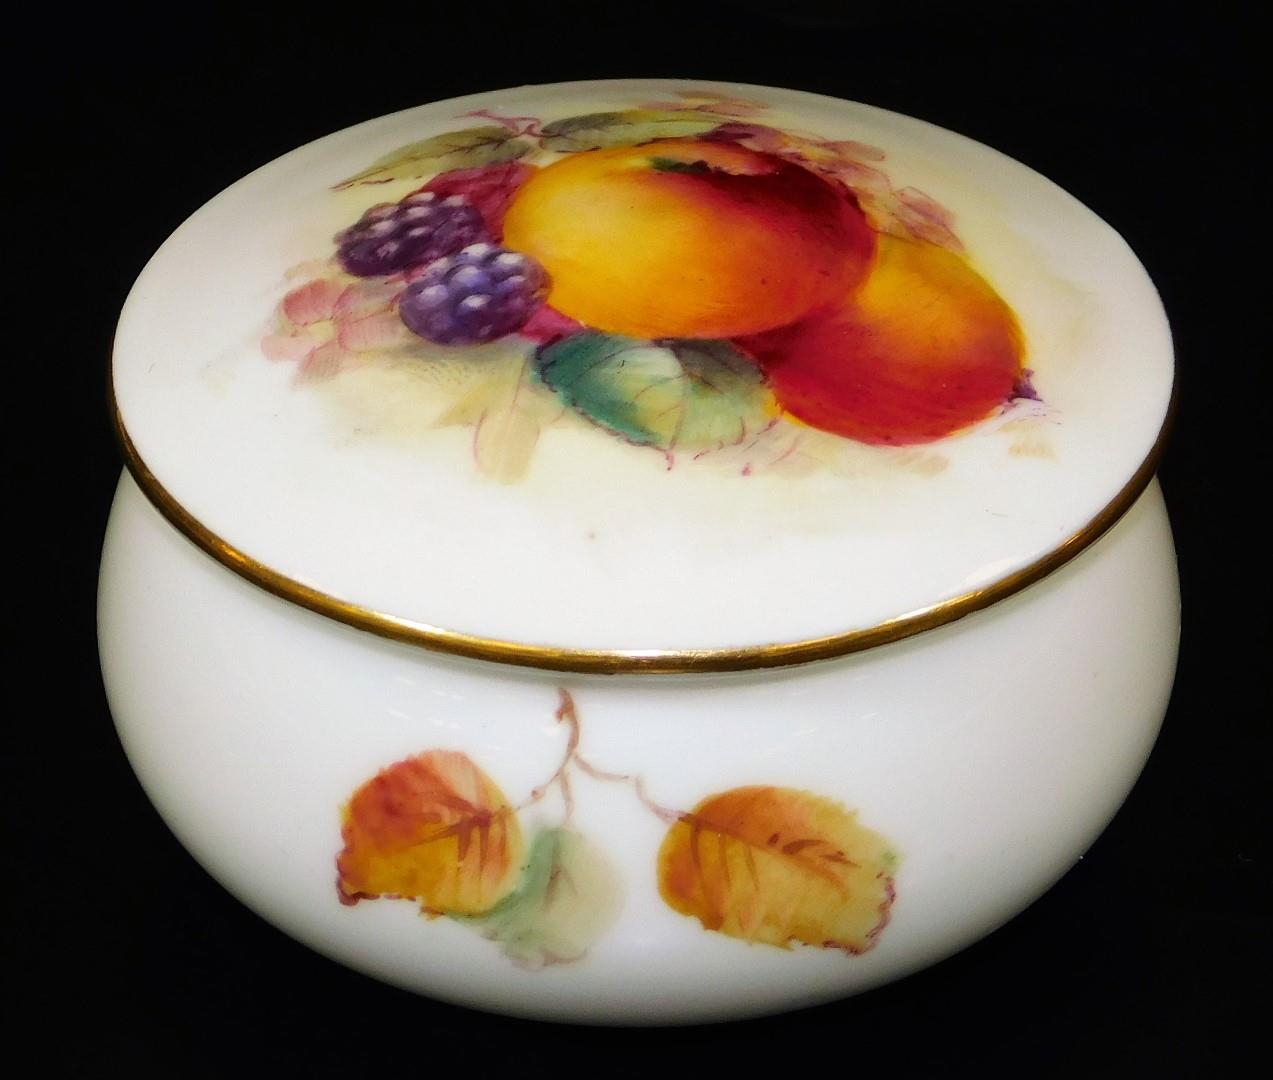 A Royal Worcester porcelain jar and cover, handpainted with autumnal fruits, blackberries and apples